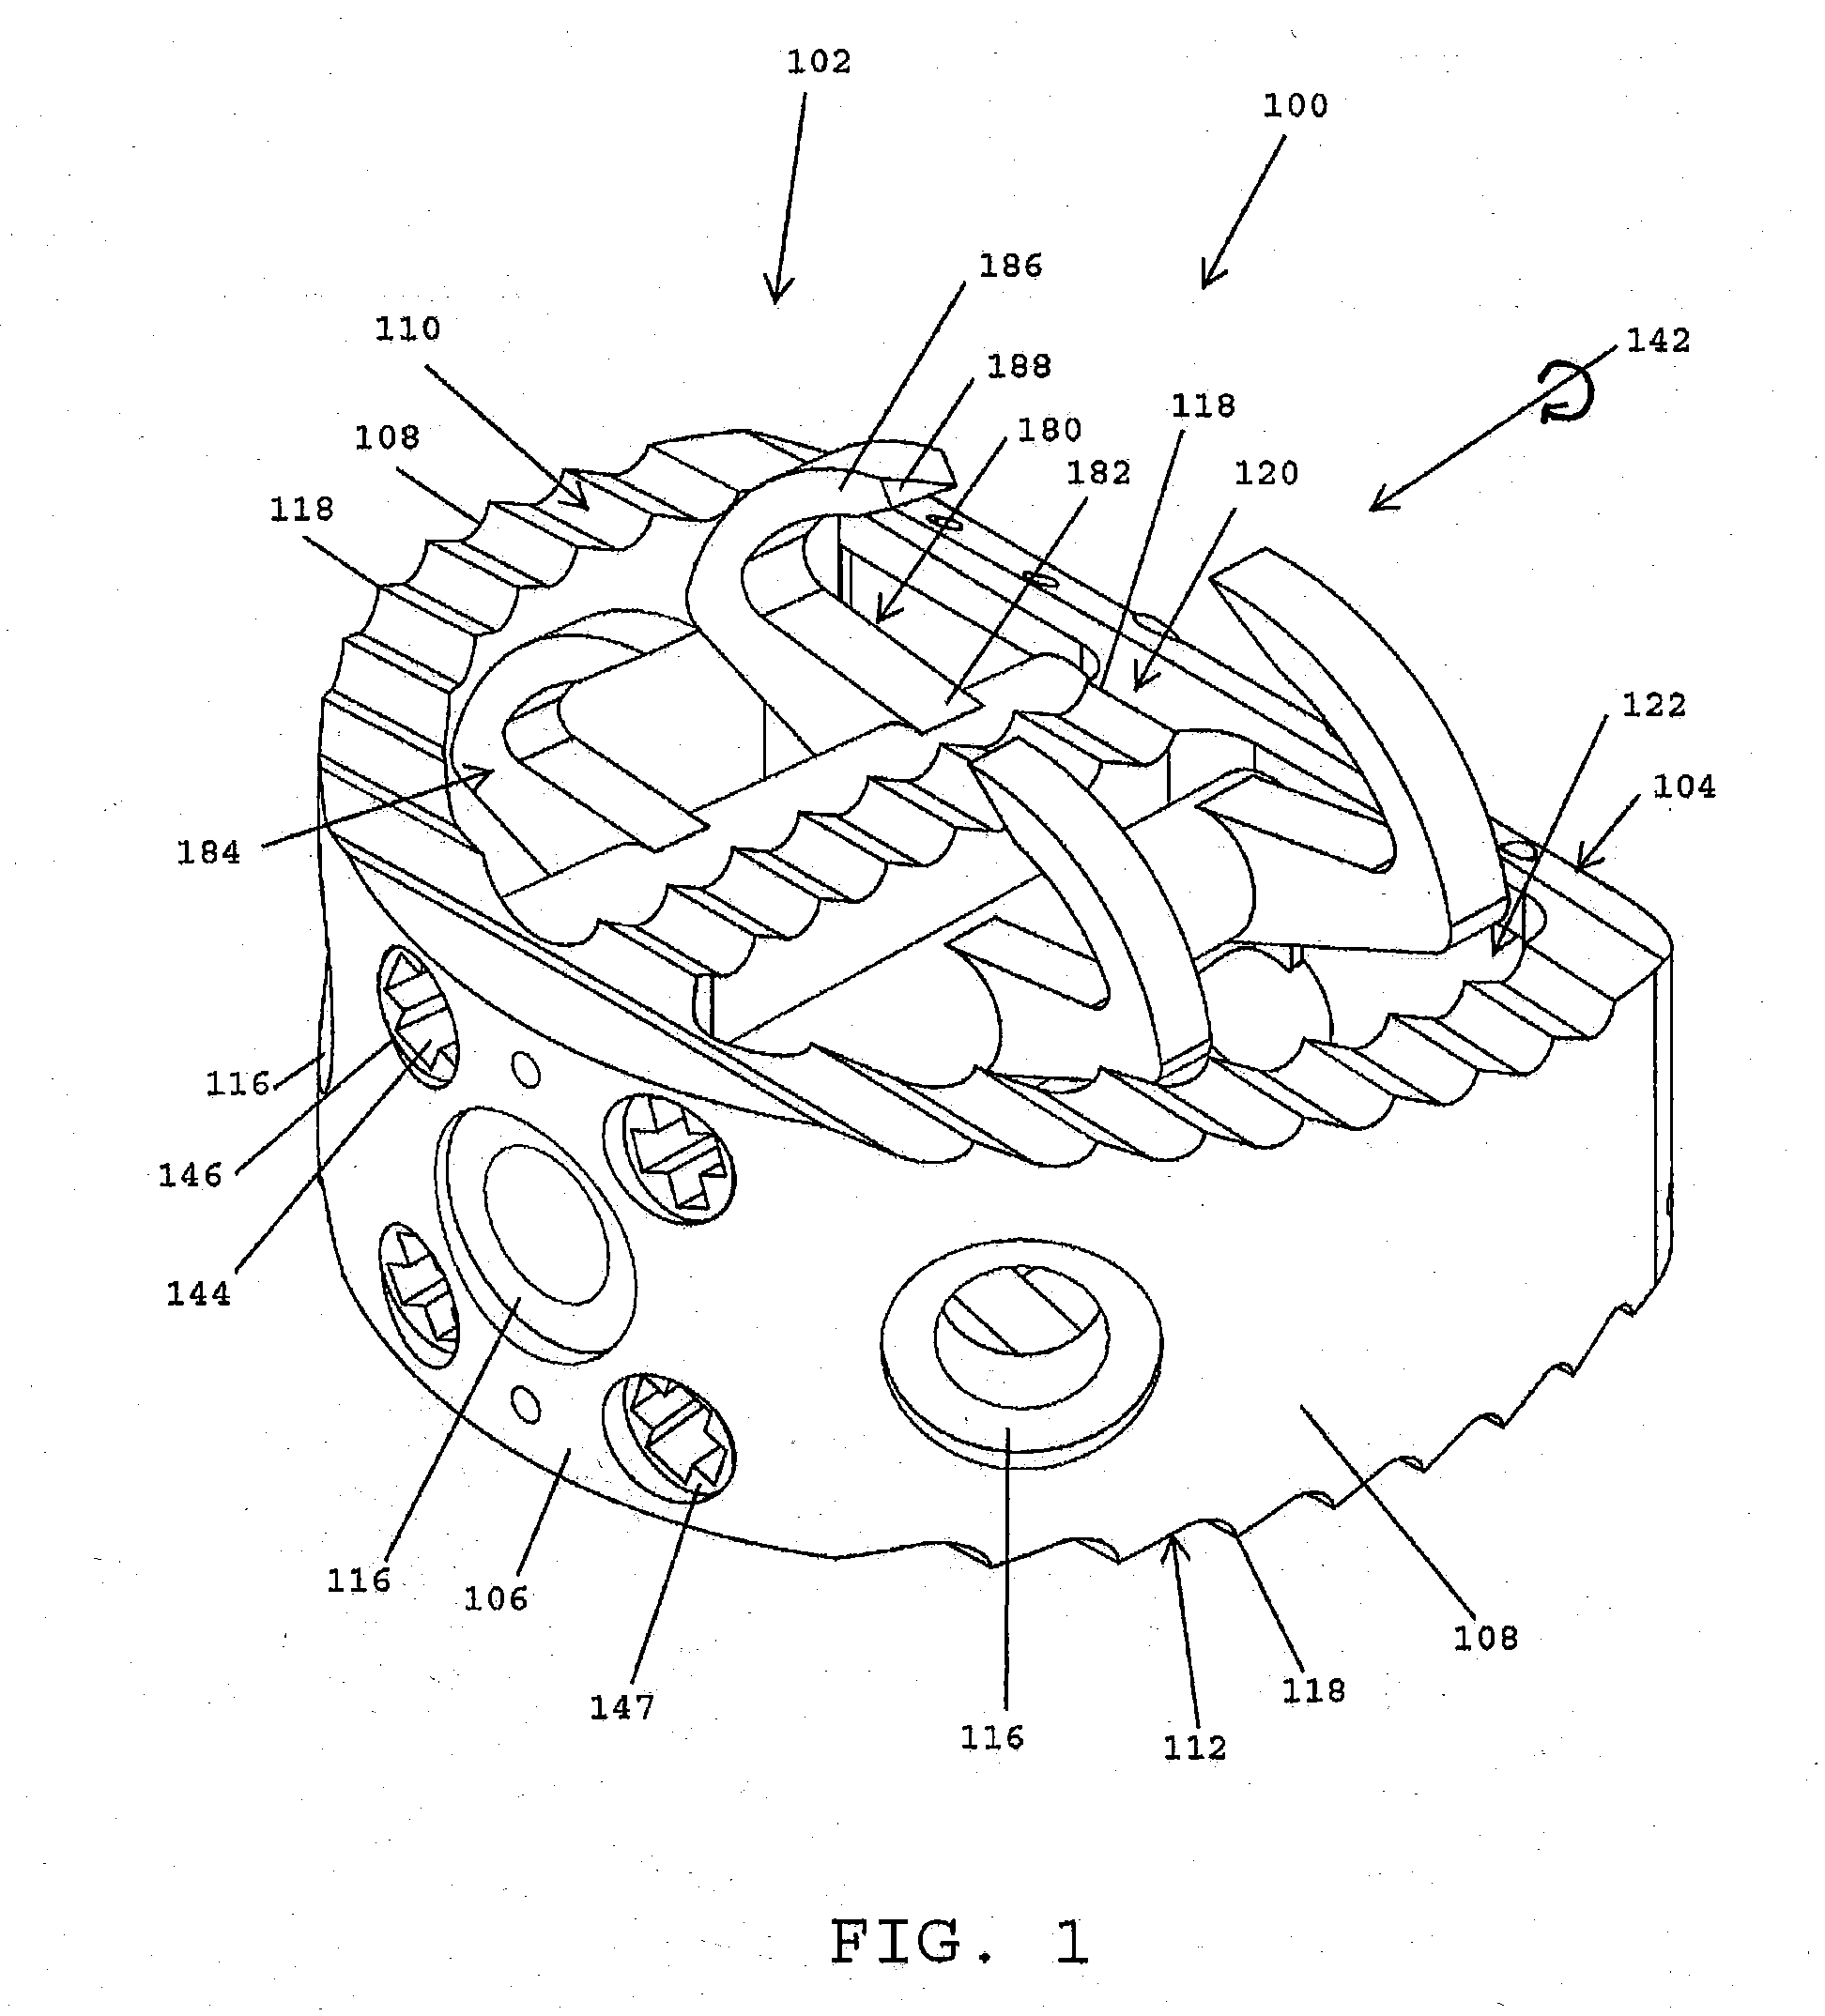 Device for Securing an Implant to Tissue